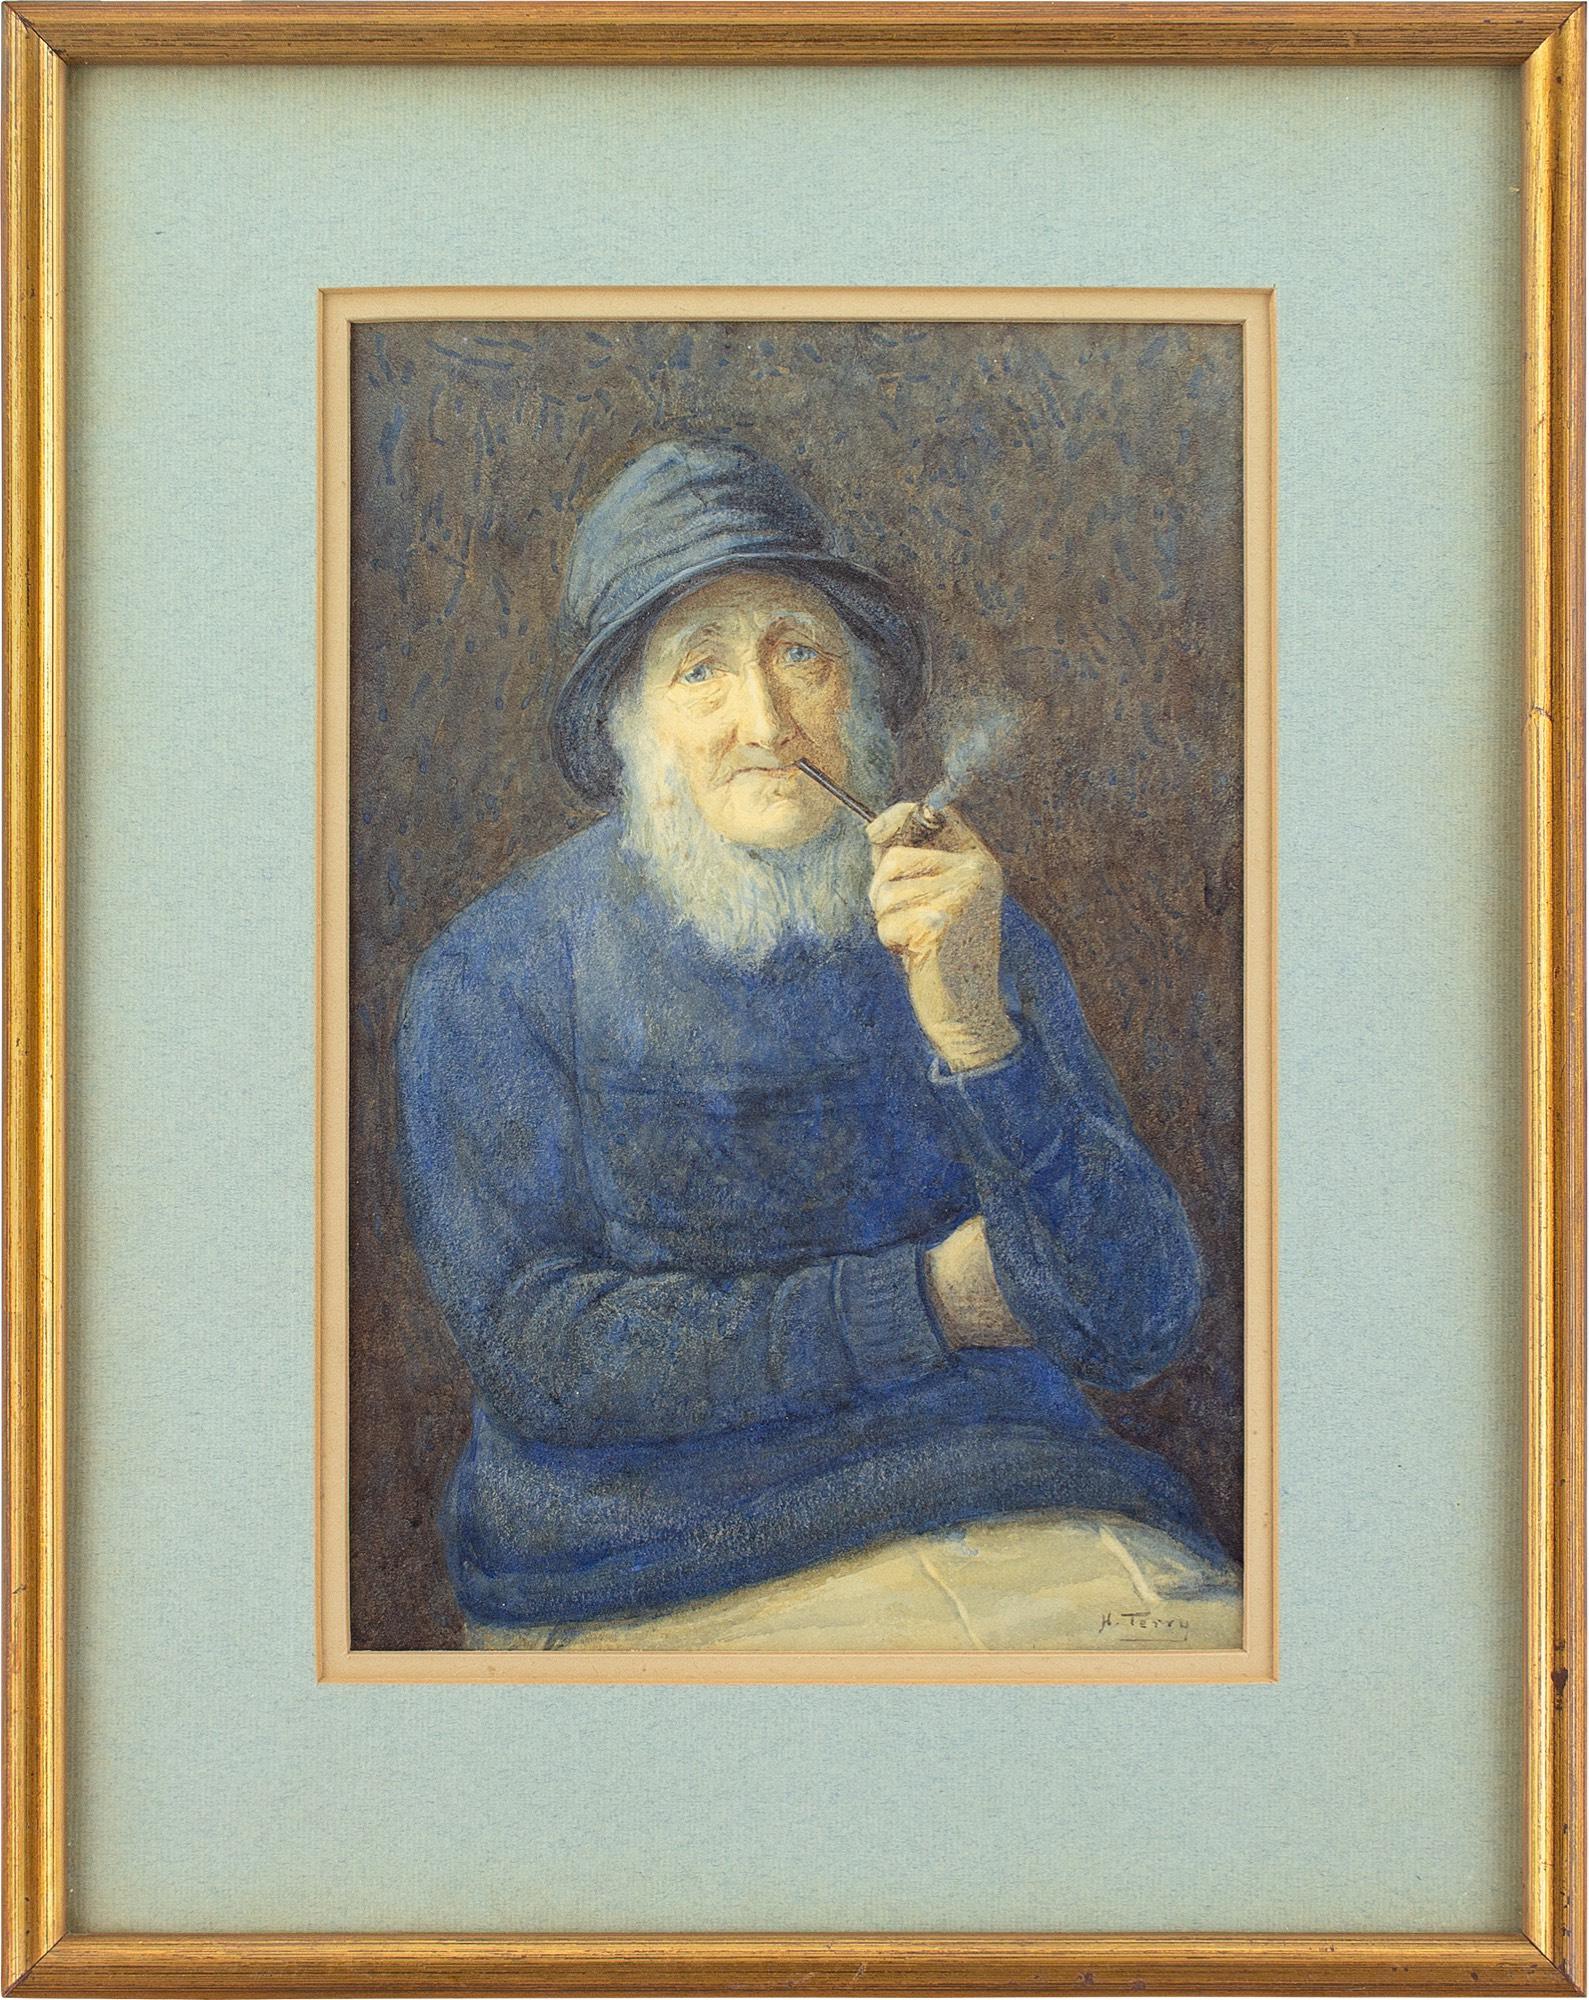 This early 20th-century watercolour by British artist Henry M Terry (1854-c.1920) depicts an elderly fisherman.

Terry’s body of work is brimming with characters: dapper old gentlemen brush top hats on Sunday mornings, doting grandfathers look